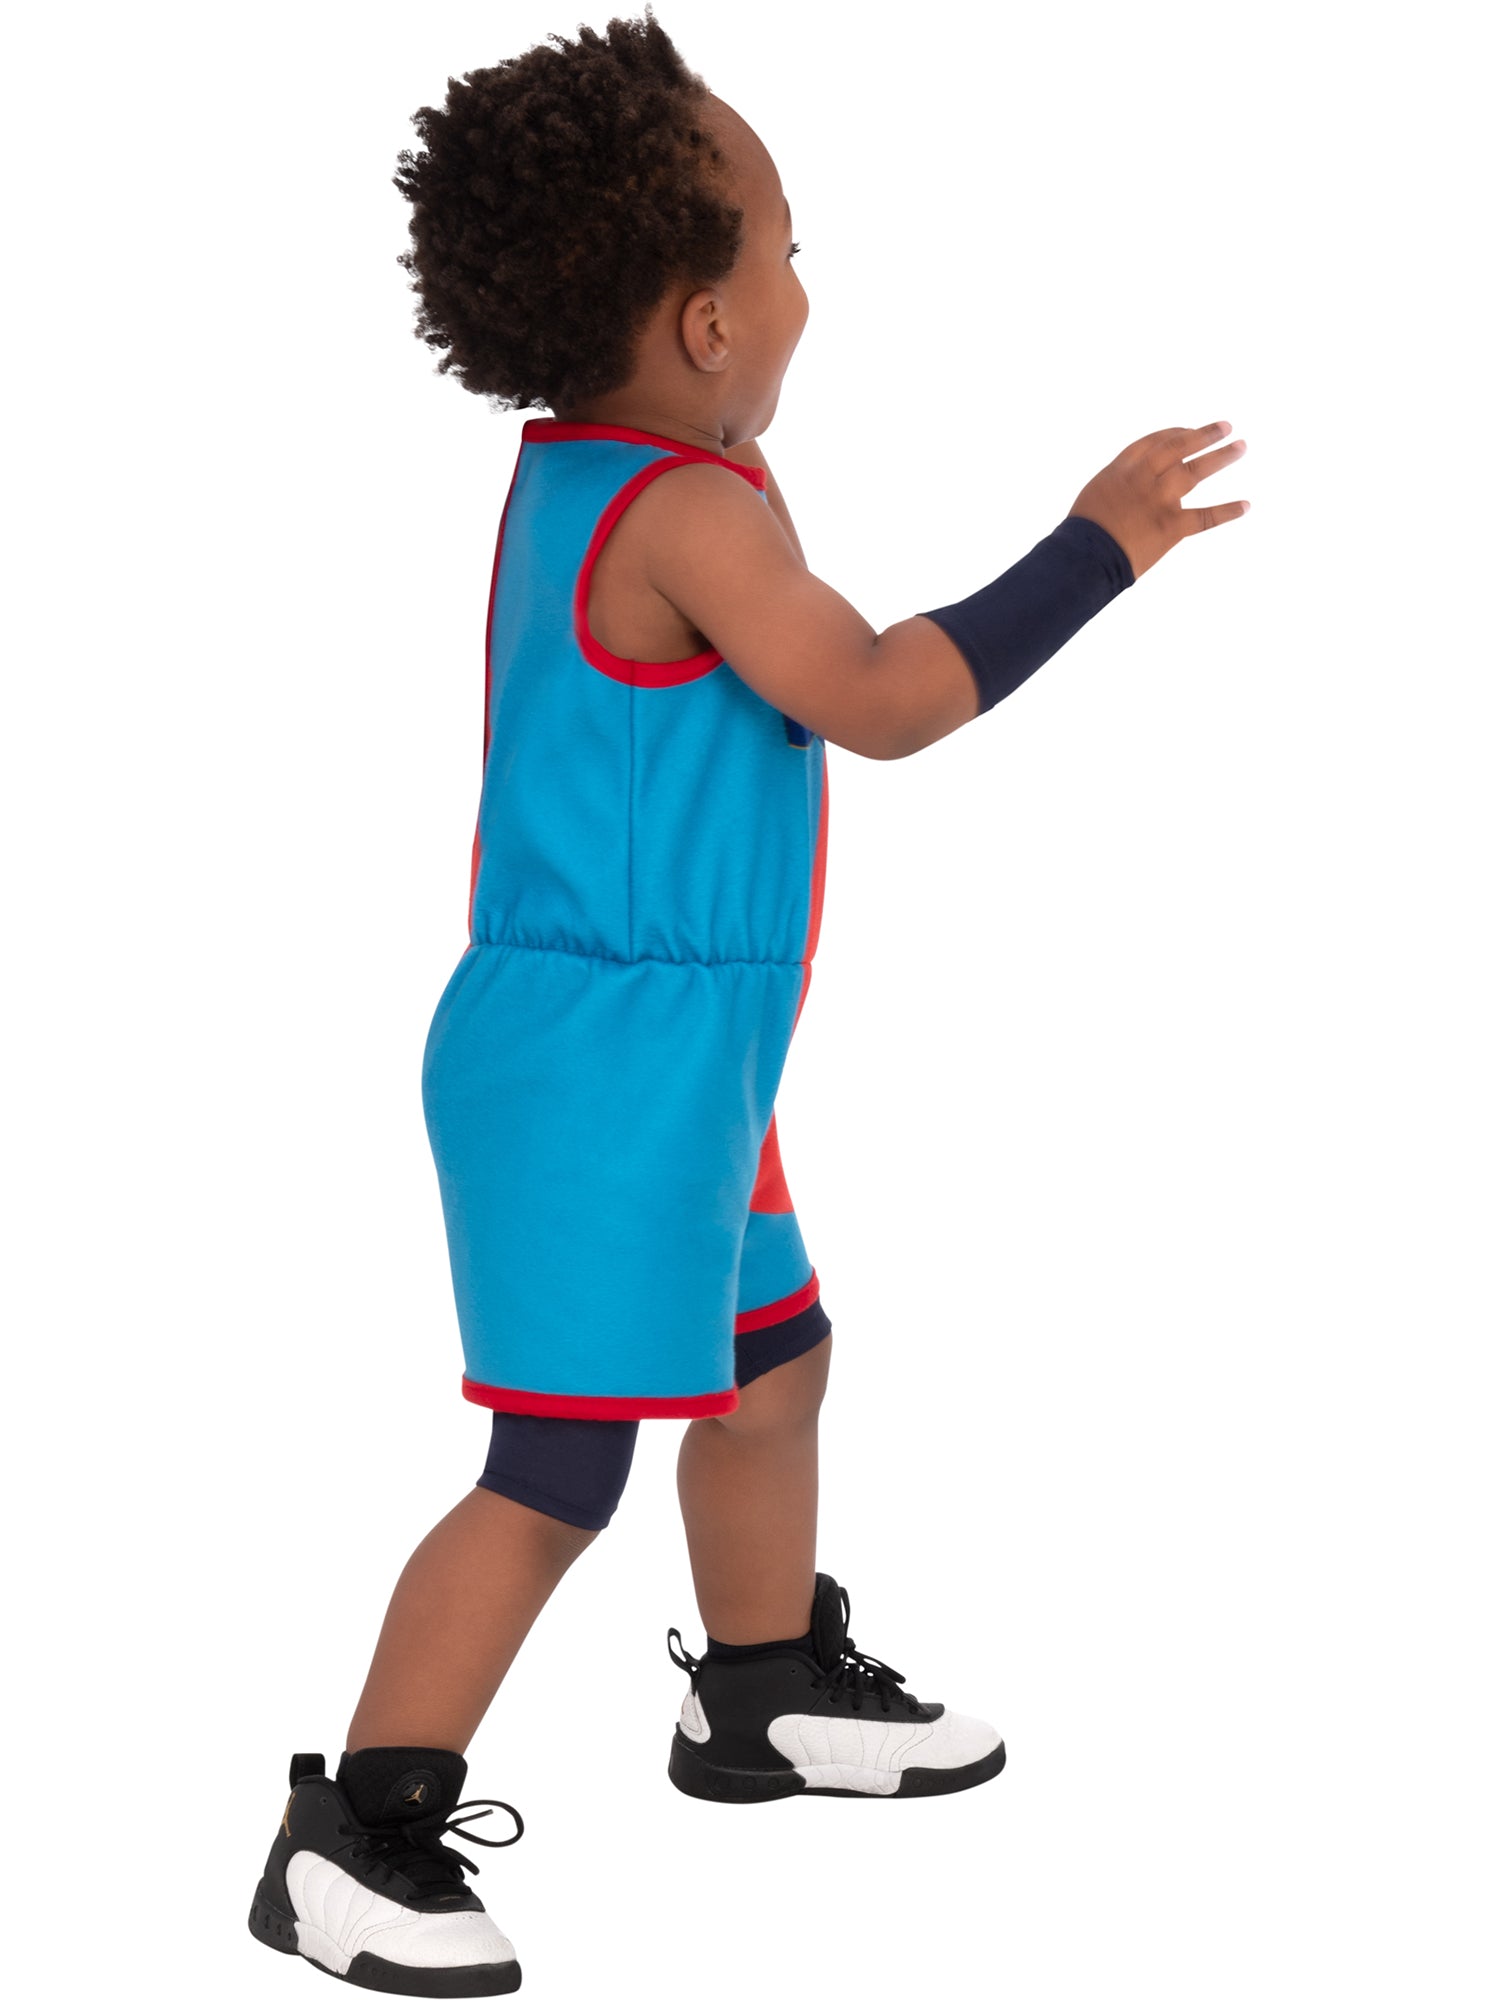 Baby/Toddler Space Jam Lebron James Costume - costumes.com